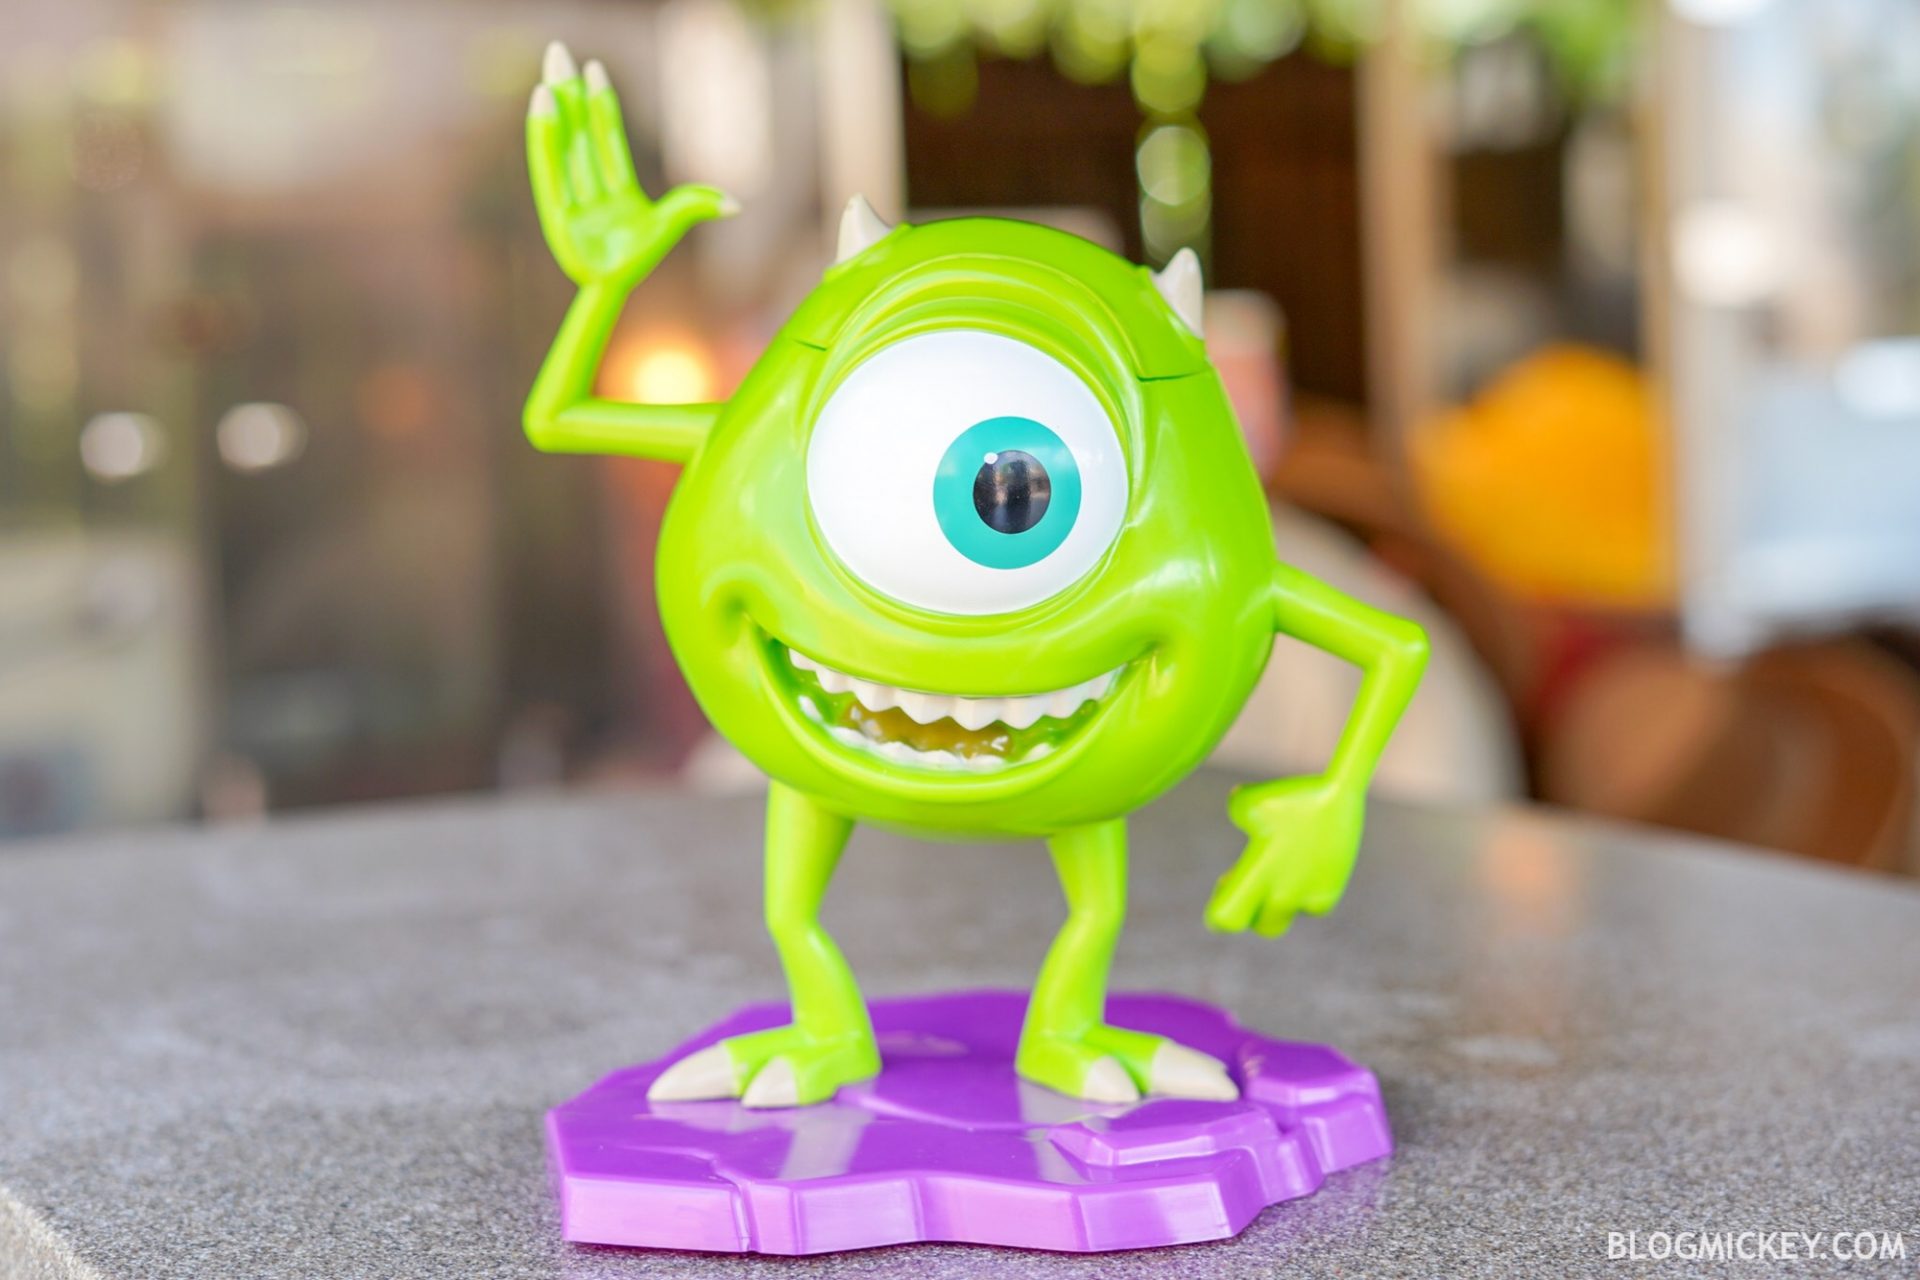 After enjoying our Most Beautiful Cake, we spotted the Mike Wazowski Sipper...